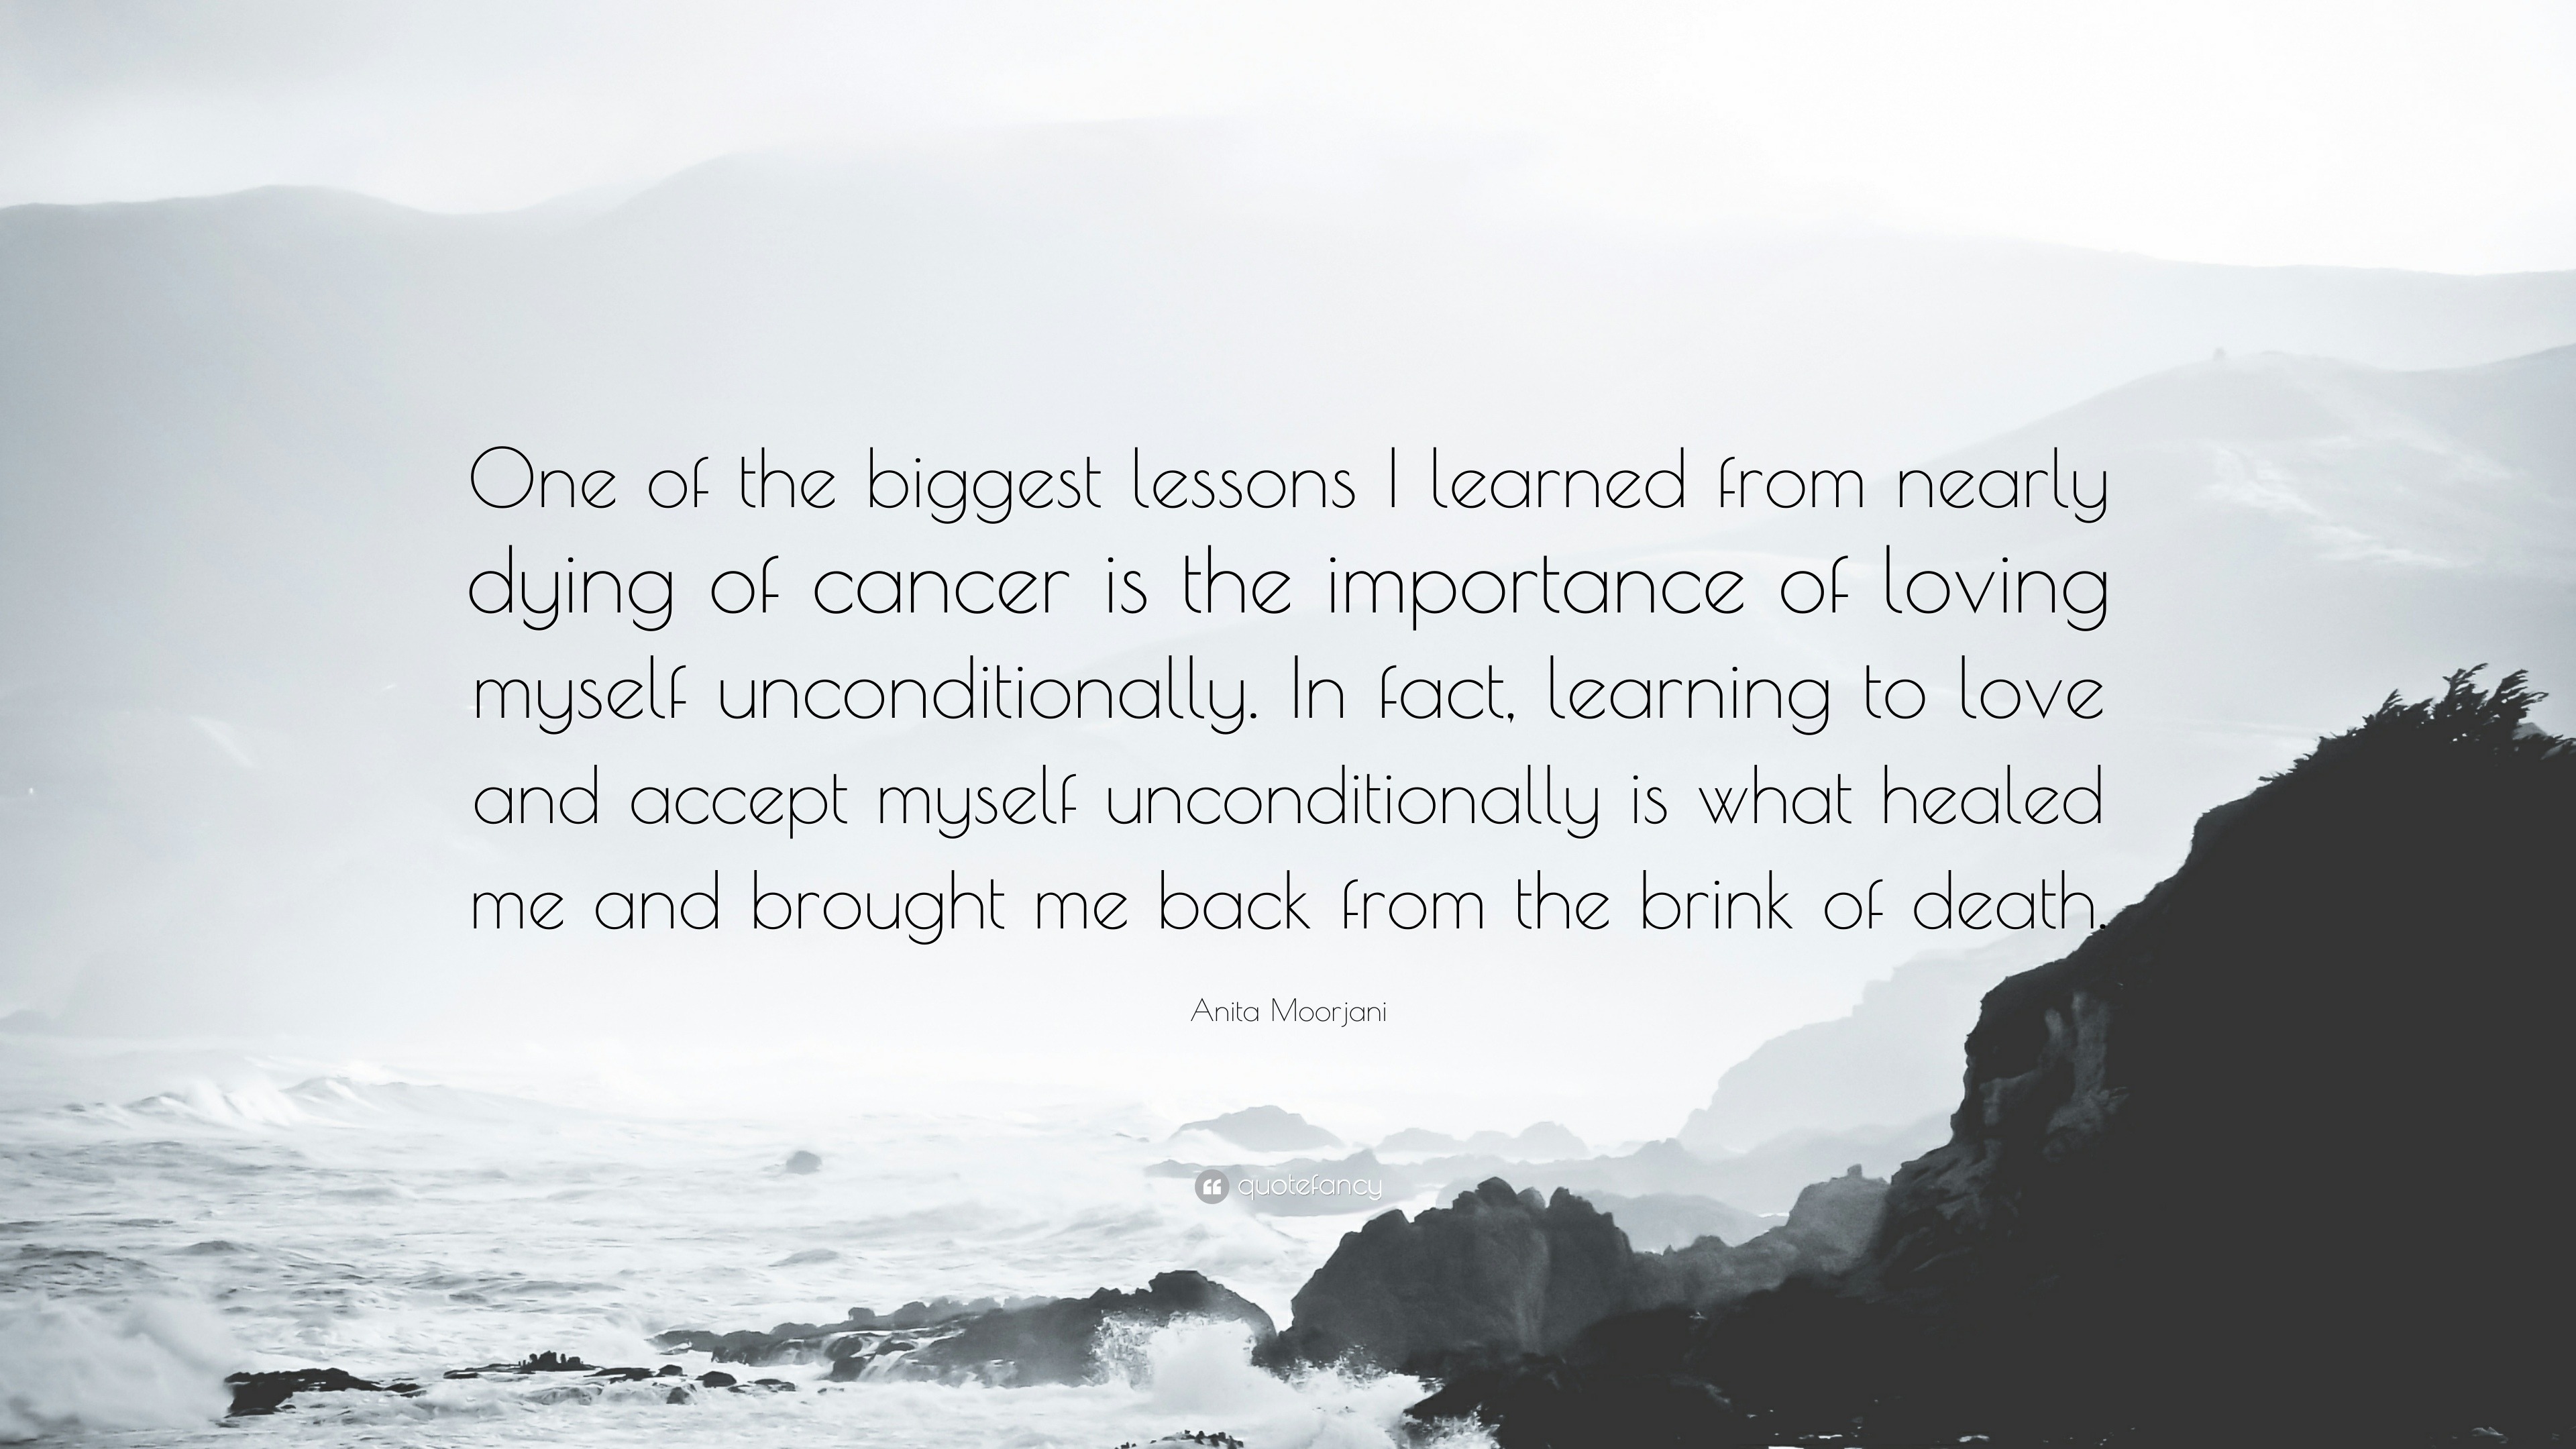 Anita Moorjani Quote “ e of the biggest lessons I learned from nearly dying of